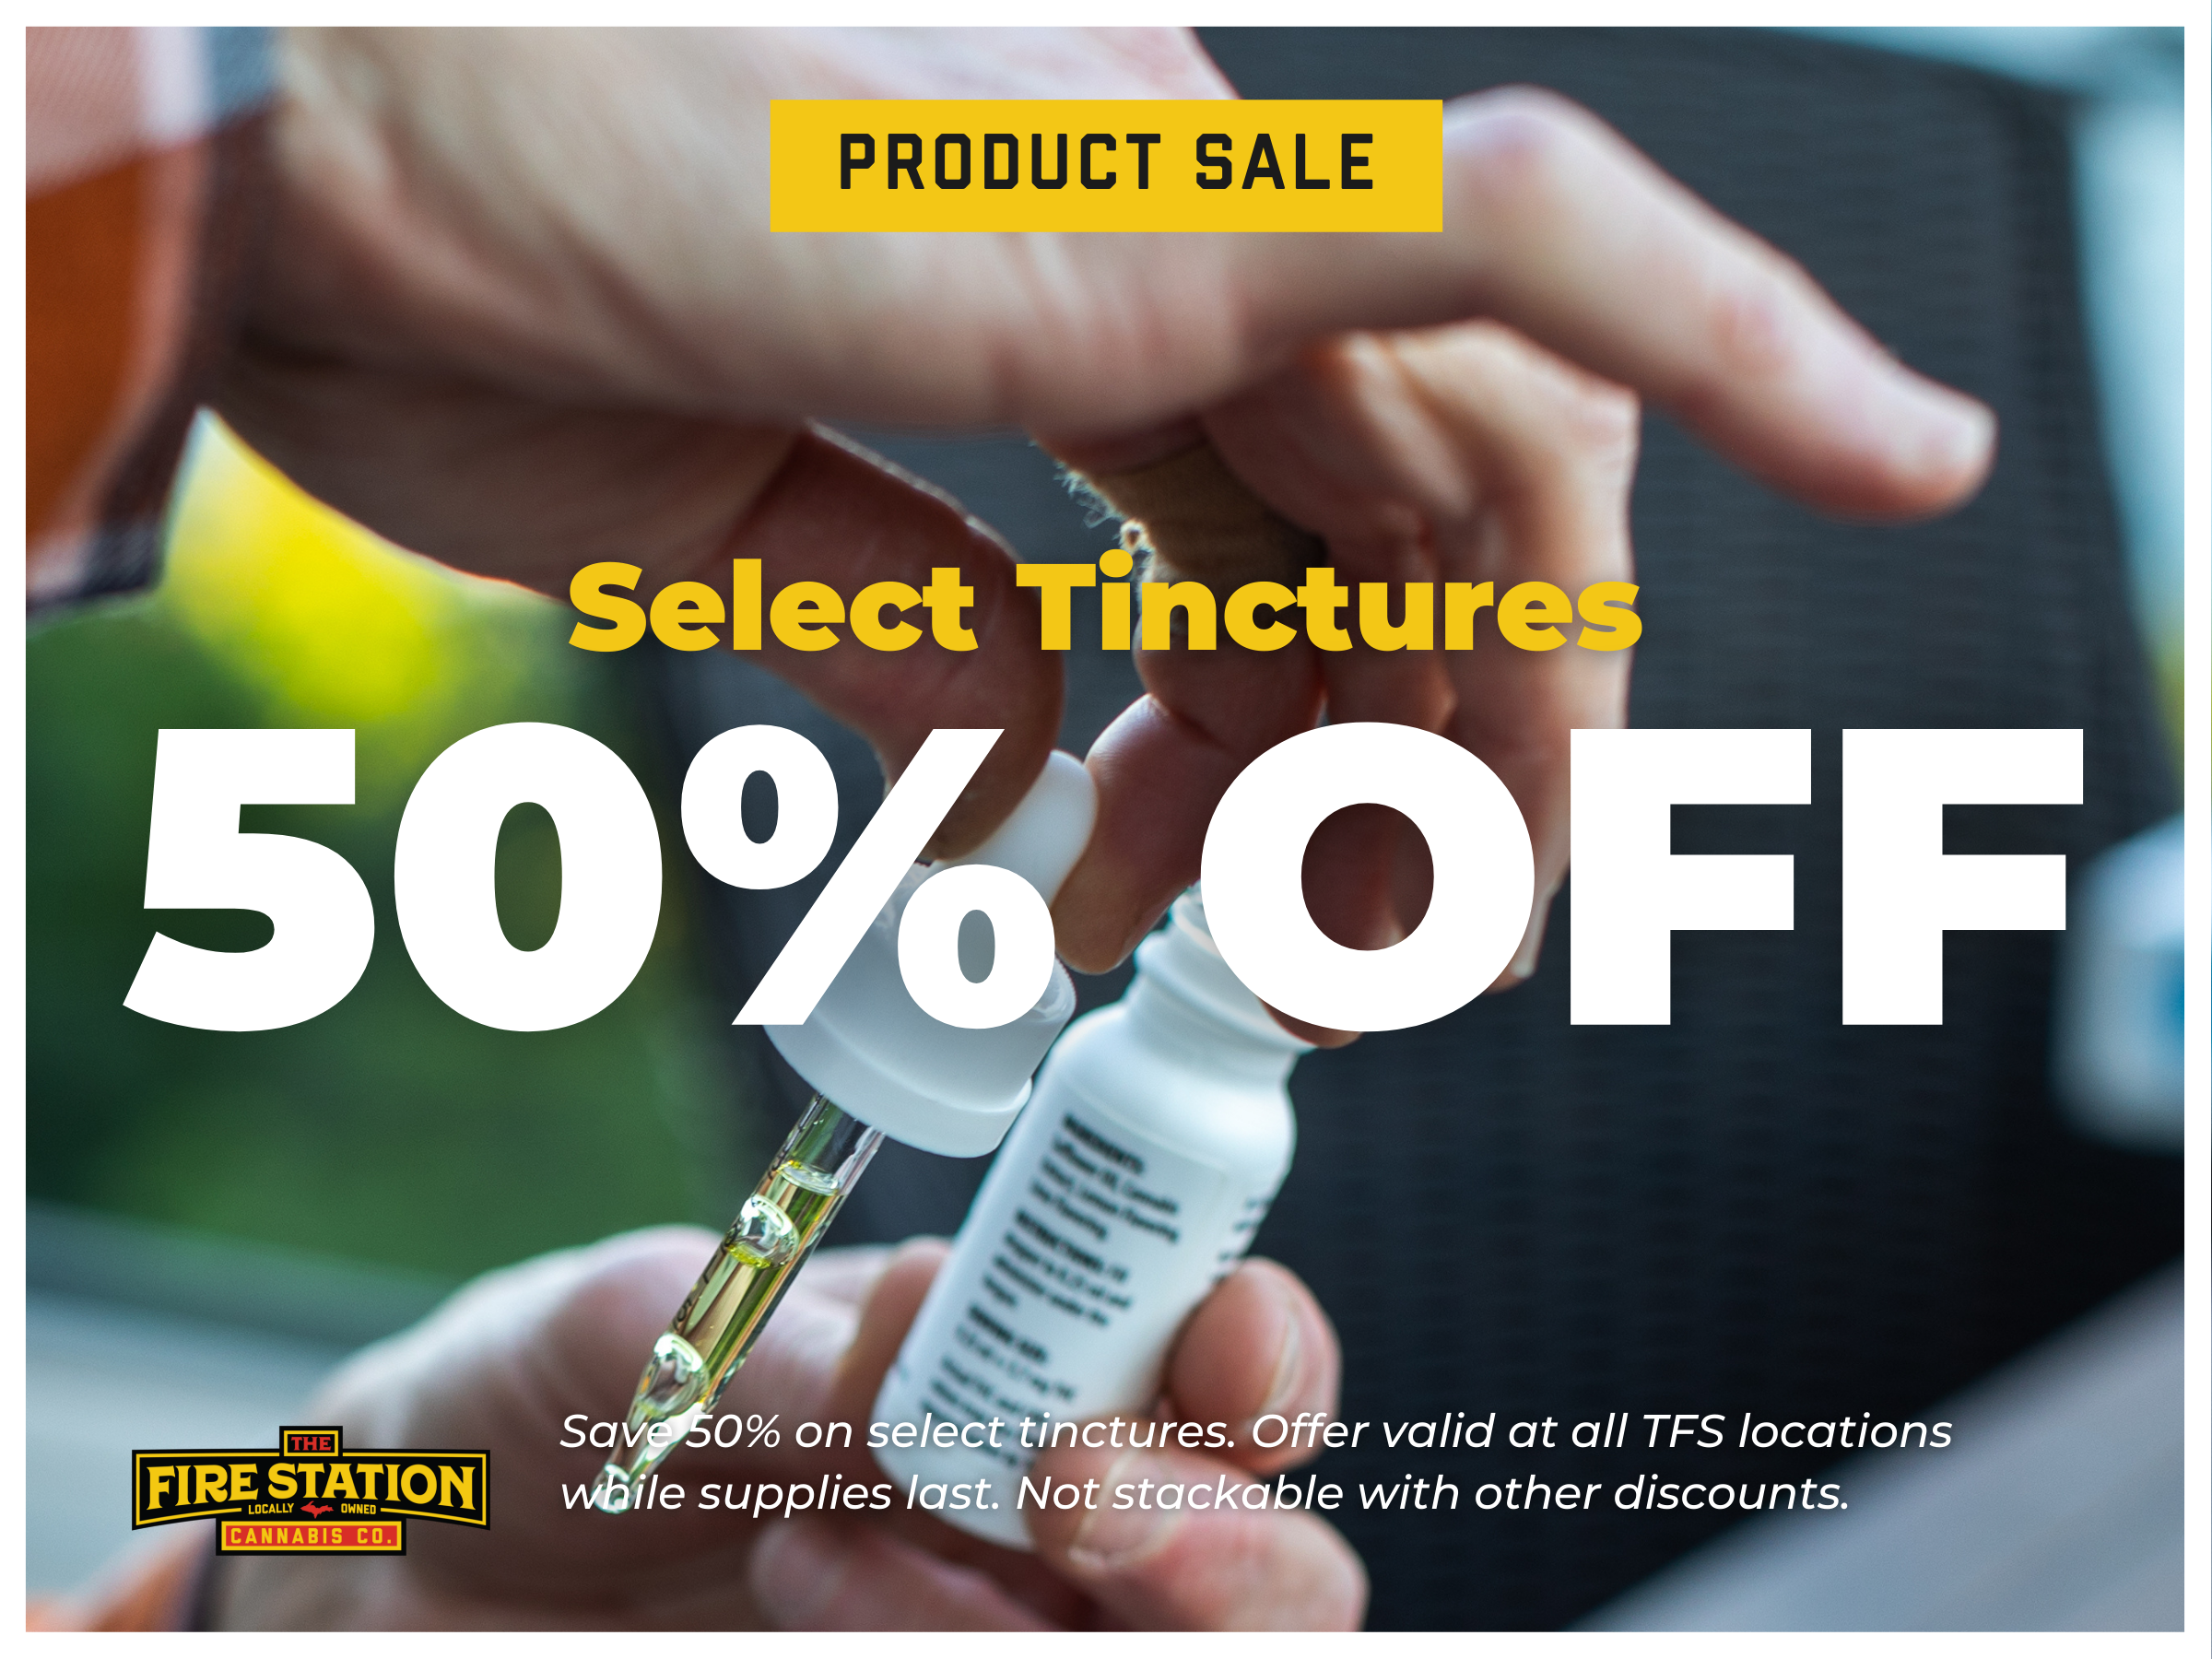 Product Sale: 50% off Select Tinctures